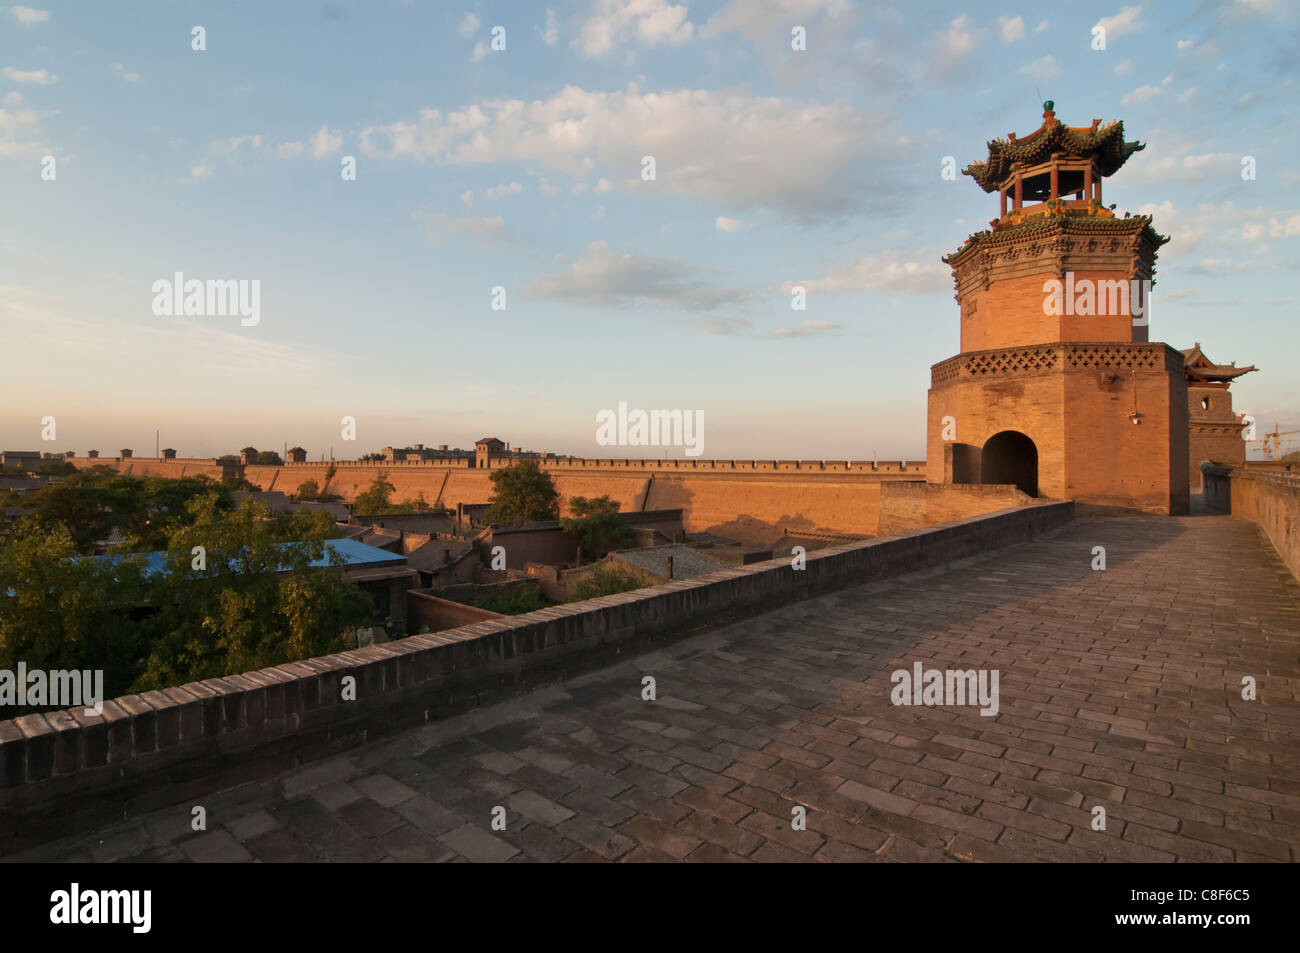 Overlook of Pingyao, renowned for its well-preserved ancient city wall, UNESCO World Heritage Site, Shanxi, China Stock Photo